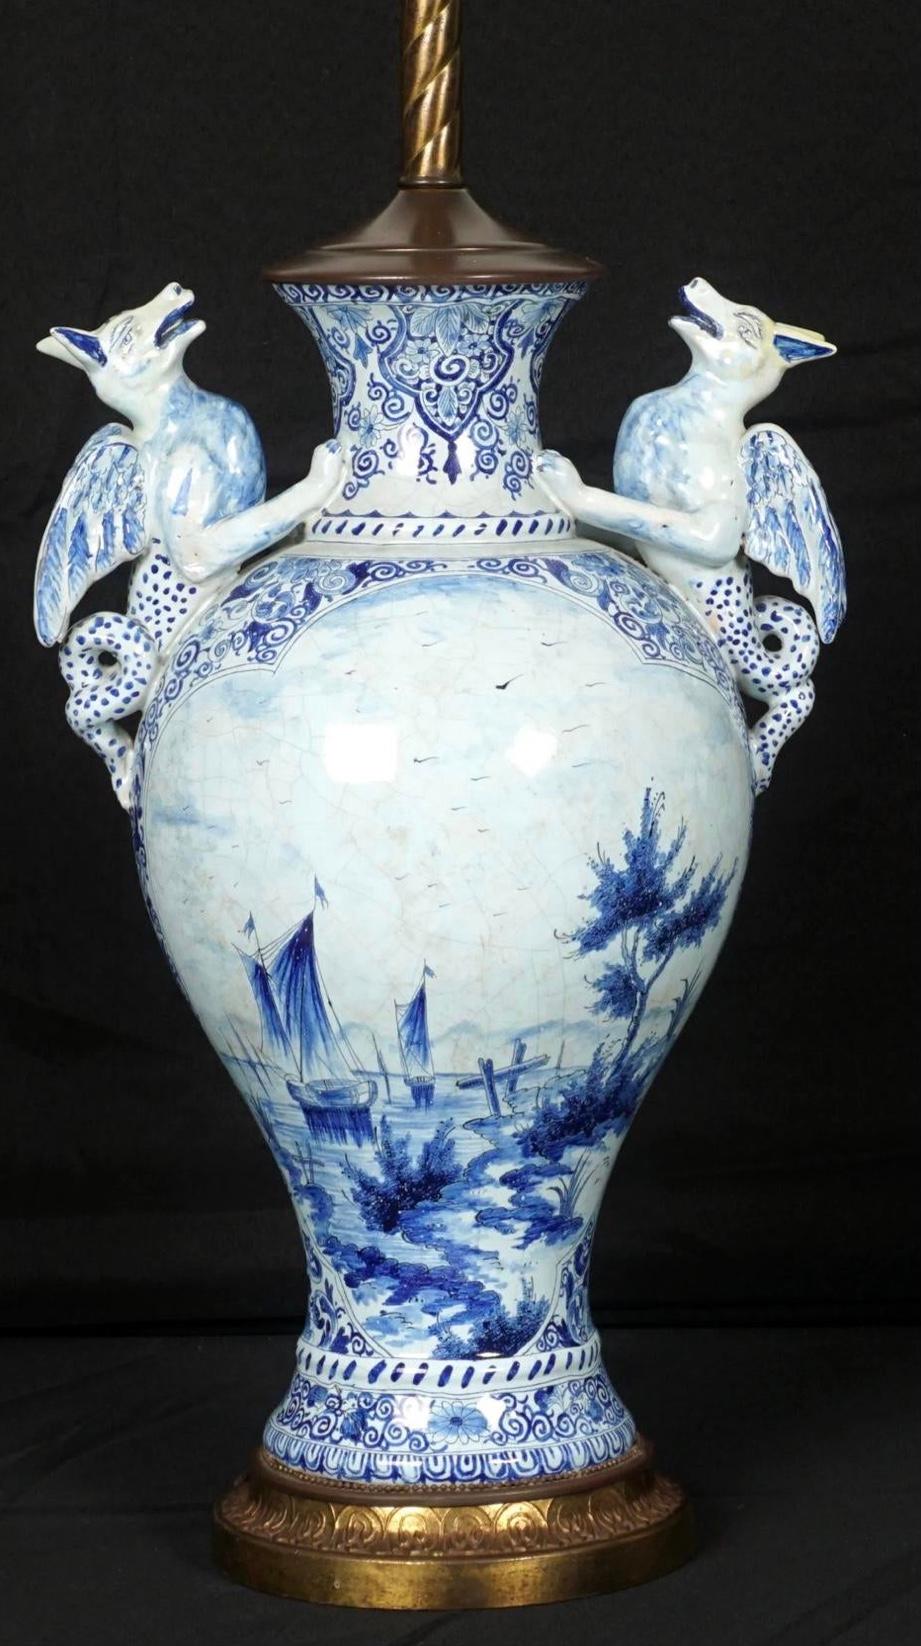 Delft Faience figural Serpent handle lamp. 18th century Dutch baluster form blue and white faience decorated vase with winged serpent handles, floral and foliate decorated with seaside scene one side, man and woman milking a goat in the opposite